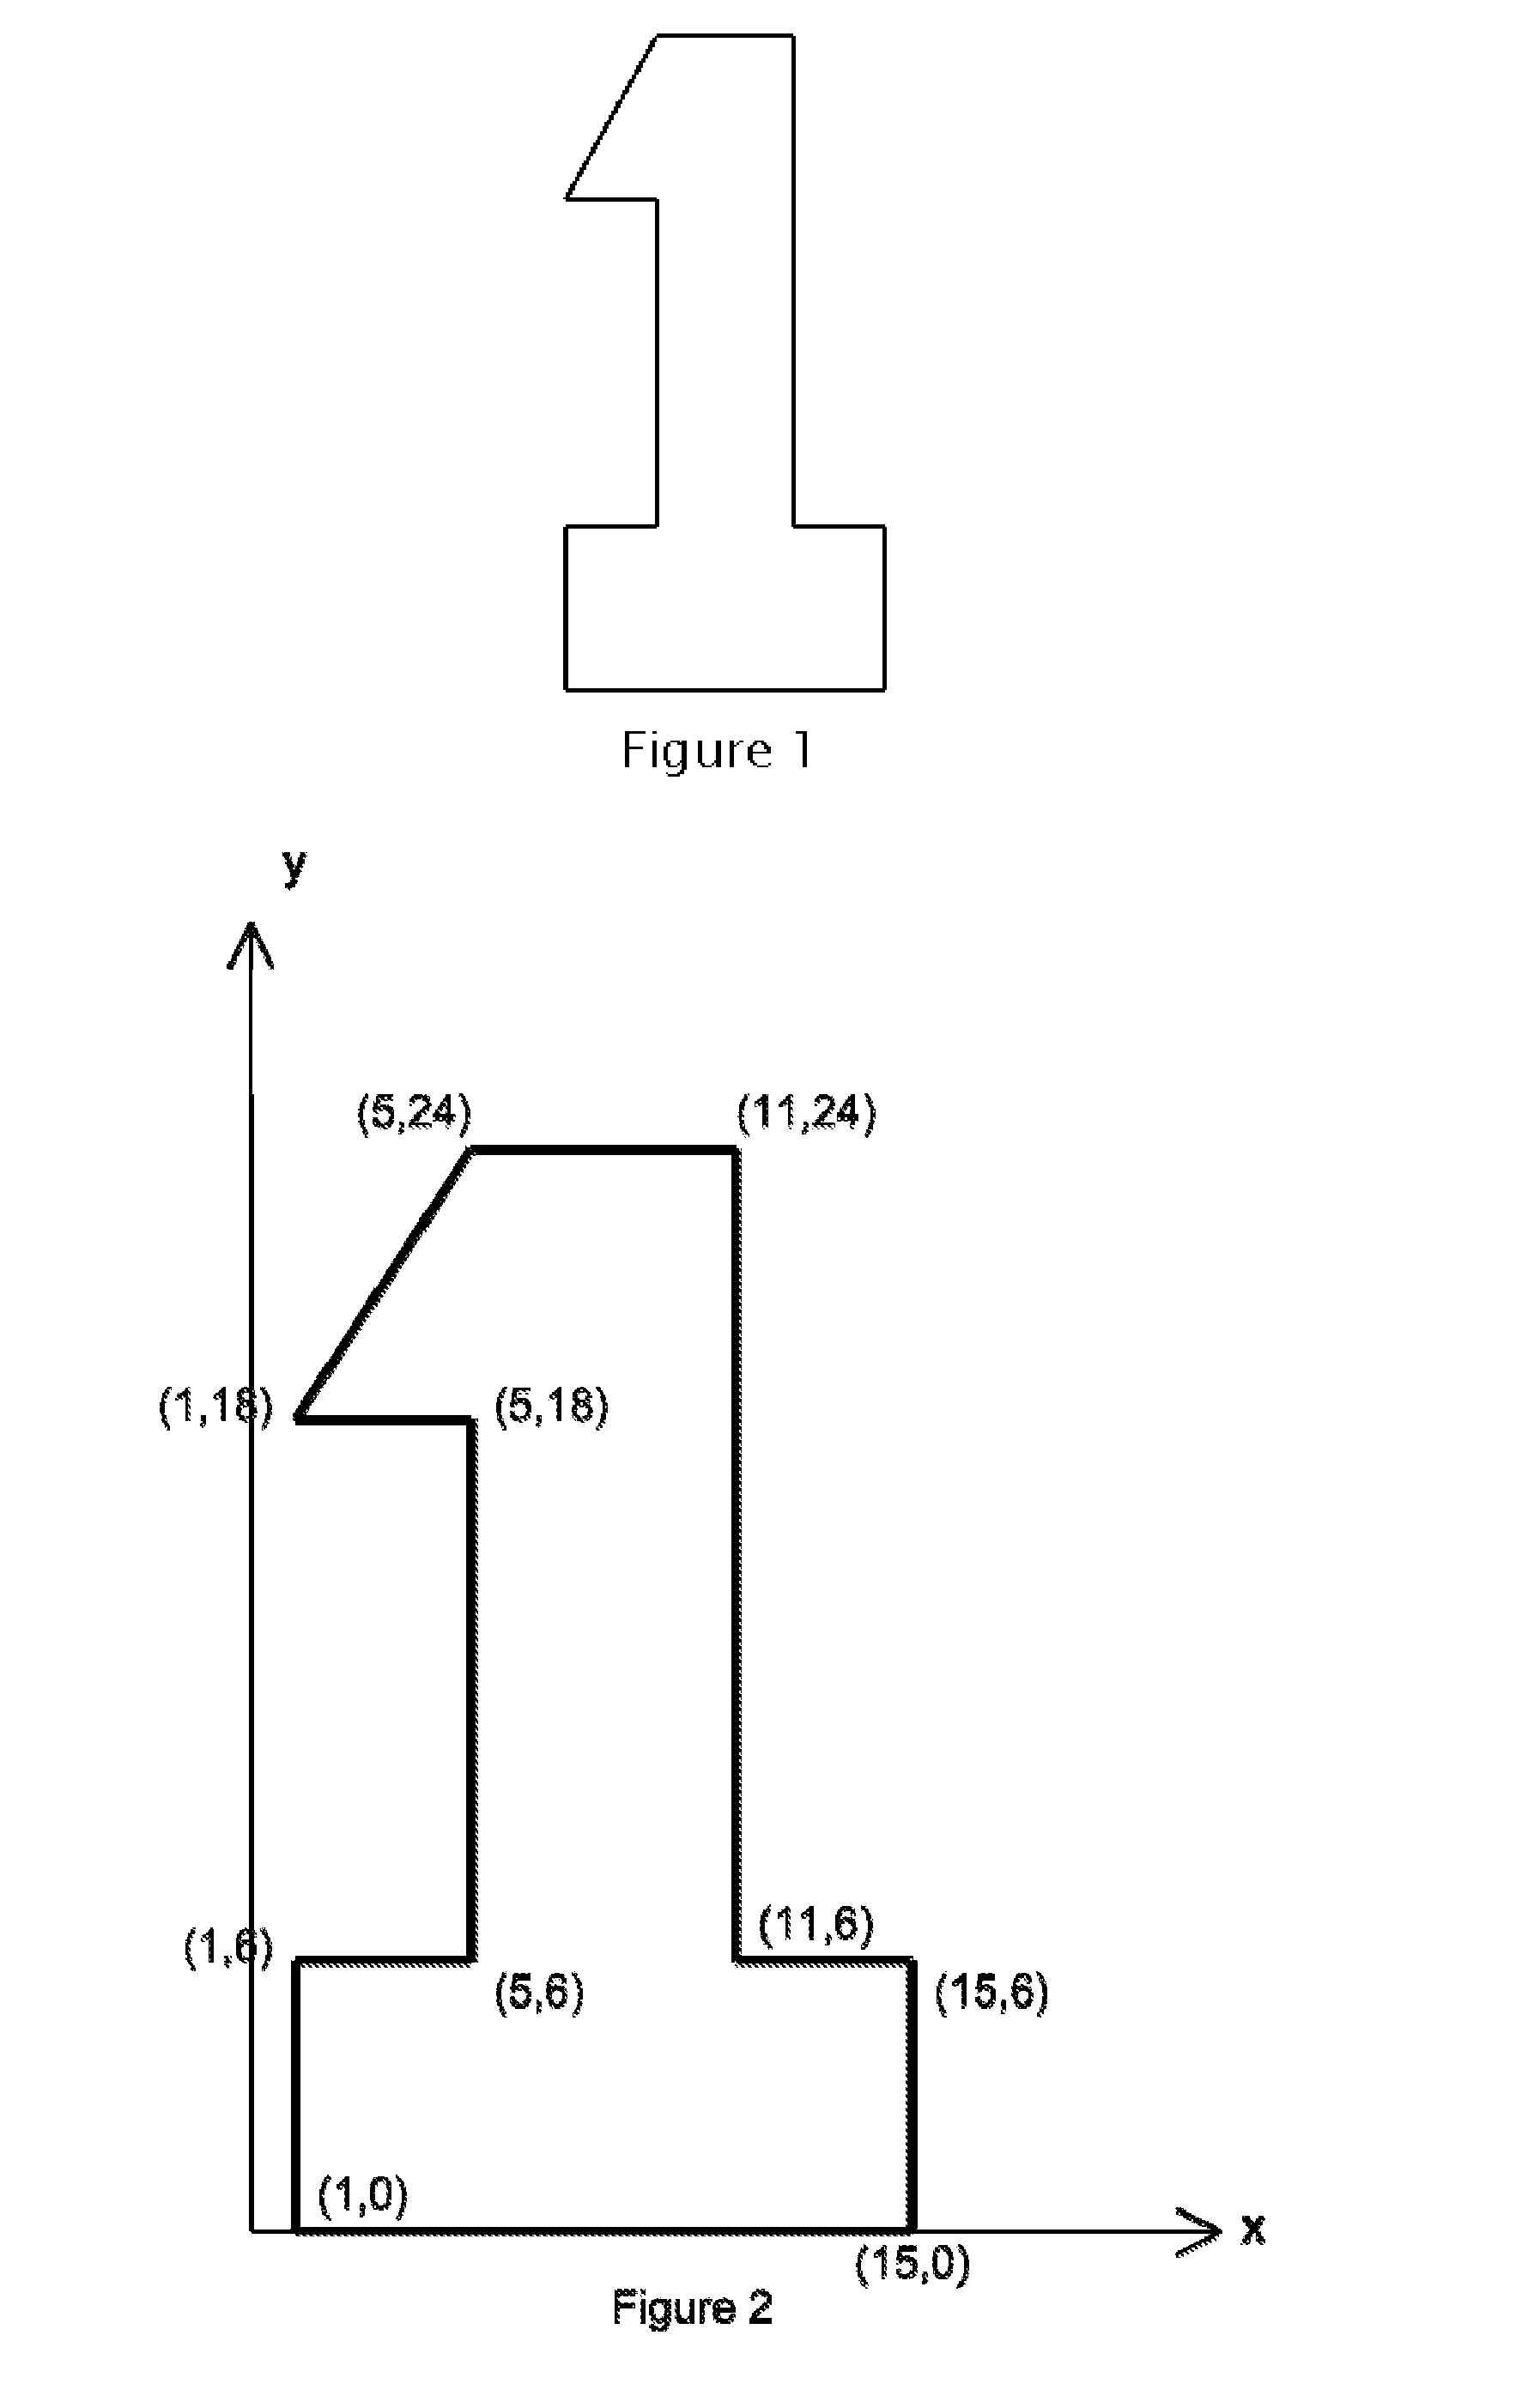 Method for generating dynamic representations for visual tests to distinguish between humans and computers